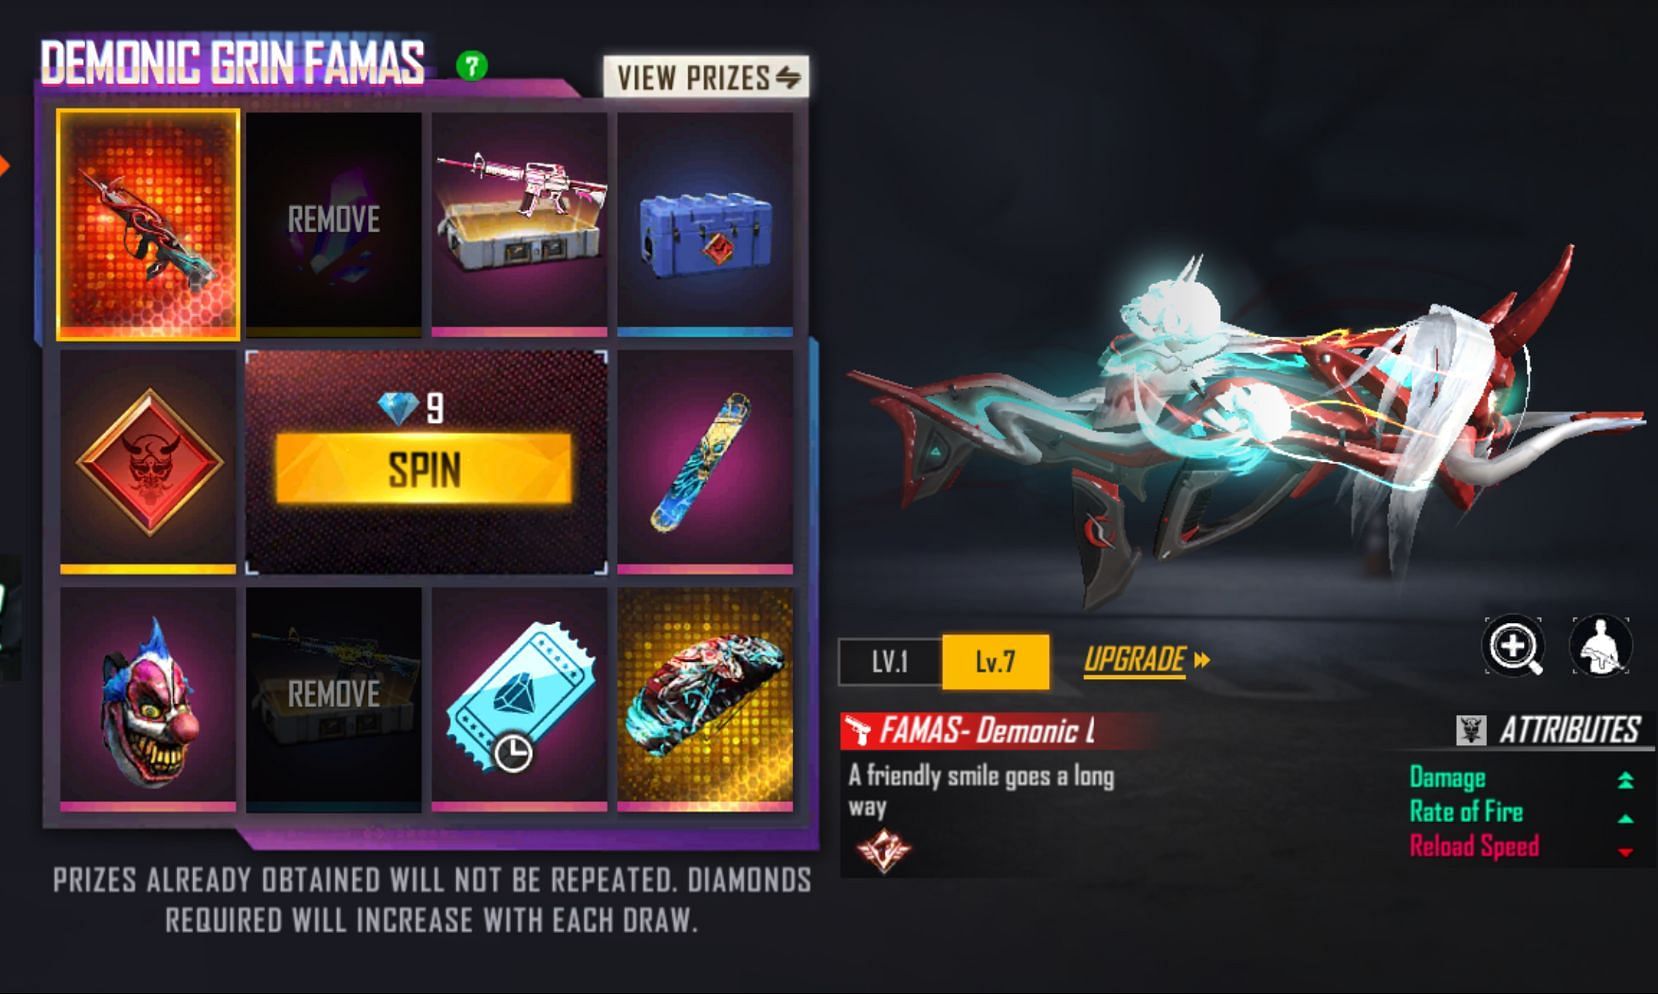 After removing the items, players can make the spins (Image via Garena)